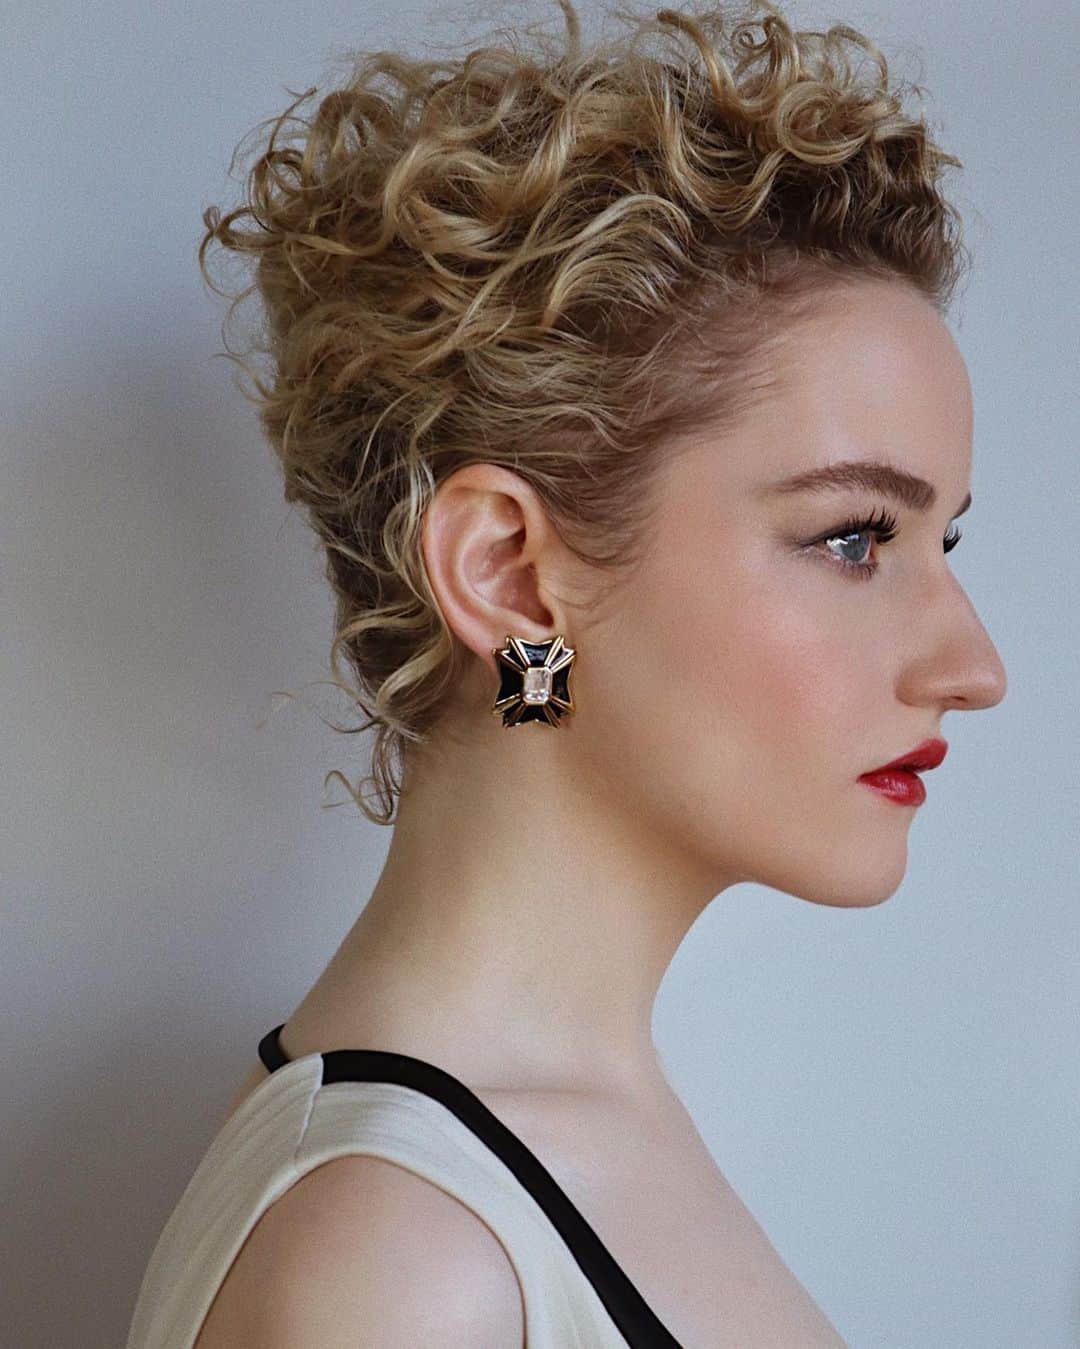 Hung Vanngoさんのインスタグラム写真 - (Hung VanngoInstagram)「#JuliaGarner (@juliagarnerofficial) for the #GoldenGlobes Awards this evening ❤️. Styling  @elizabethsaltzman  Nails @tony748474  Hair @bobbyeliot  Makeup @hungvanngo using @chanel.beauty @welovecoco  #welovecoco #WorkingWithChanel ❤️ Here is a full products breakdown:  SKIN PREP: Hydra Beauty Nourishing Lip Care Hydra Beauty Micro Serum Intense Replenishing Hydration Hydra Beauty Micro Gel Yeux Intense Smoothing Eye Gel Hydra Beauty Micro Creme Fortifying Replenishing Hydration  FACE: Le Beiges Healthy Glow Foundation Hydration and Longwear in shade BR22 Le Correcteur De Chanel Longwear Concealer in shade 10 Le Beiges Healthy Glow Bronzing Cream (Soleil Tan Bronze Universel) Le Beiges Healthy Glow Sheer Powder in shade 20 Baume Essentiel in shade Printanier Fleurs De Printemps Blush and Highlighter Duo  EYEBROWS: Crayon Sourcils in 10 Blond Cendre Le Gel Sourcils in 350 Transparent  EYES: La Base Ombre Q Paupieres Longwear Eyeshadow Primer Ombré Premiere Longwear Cream Shadow in shades 844 Gemme Doree and 840 Patine Bronze Stylo Yeux Waterproof Long Lasting Eyeliner in shade 932 Noir Petrole Le Volume De Chanel Mascara in shade 10 Noir  LIPS Rouge CoCo Bloom in shade 134 Sunlight (Waitlist is now open on redcarpeybeauty.Chanel.com! ❤️)」3月1日 9時12分 - hungvanngo